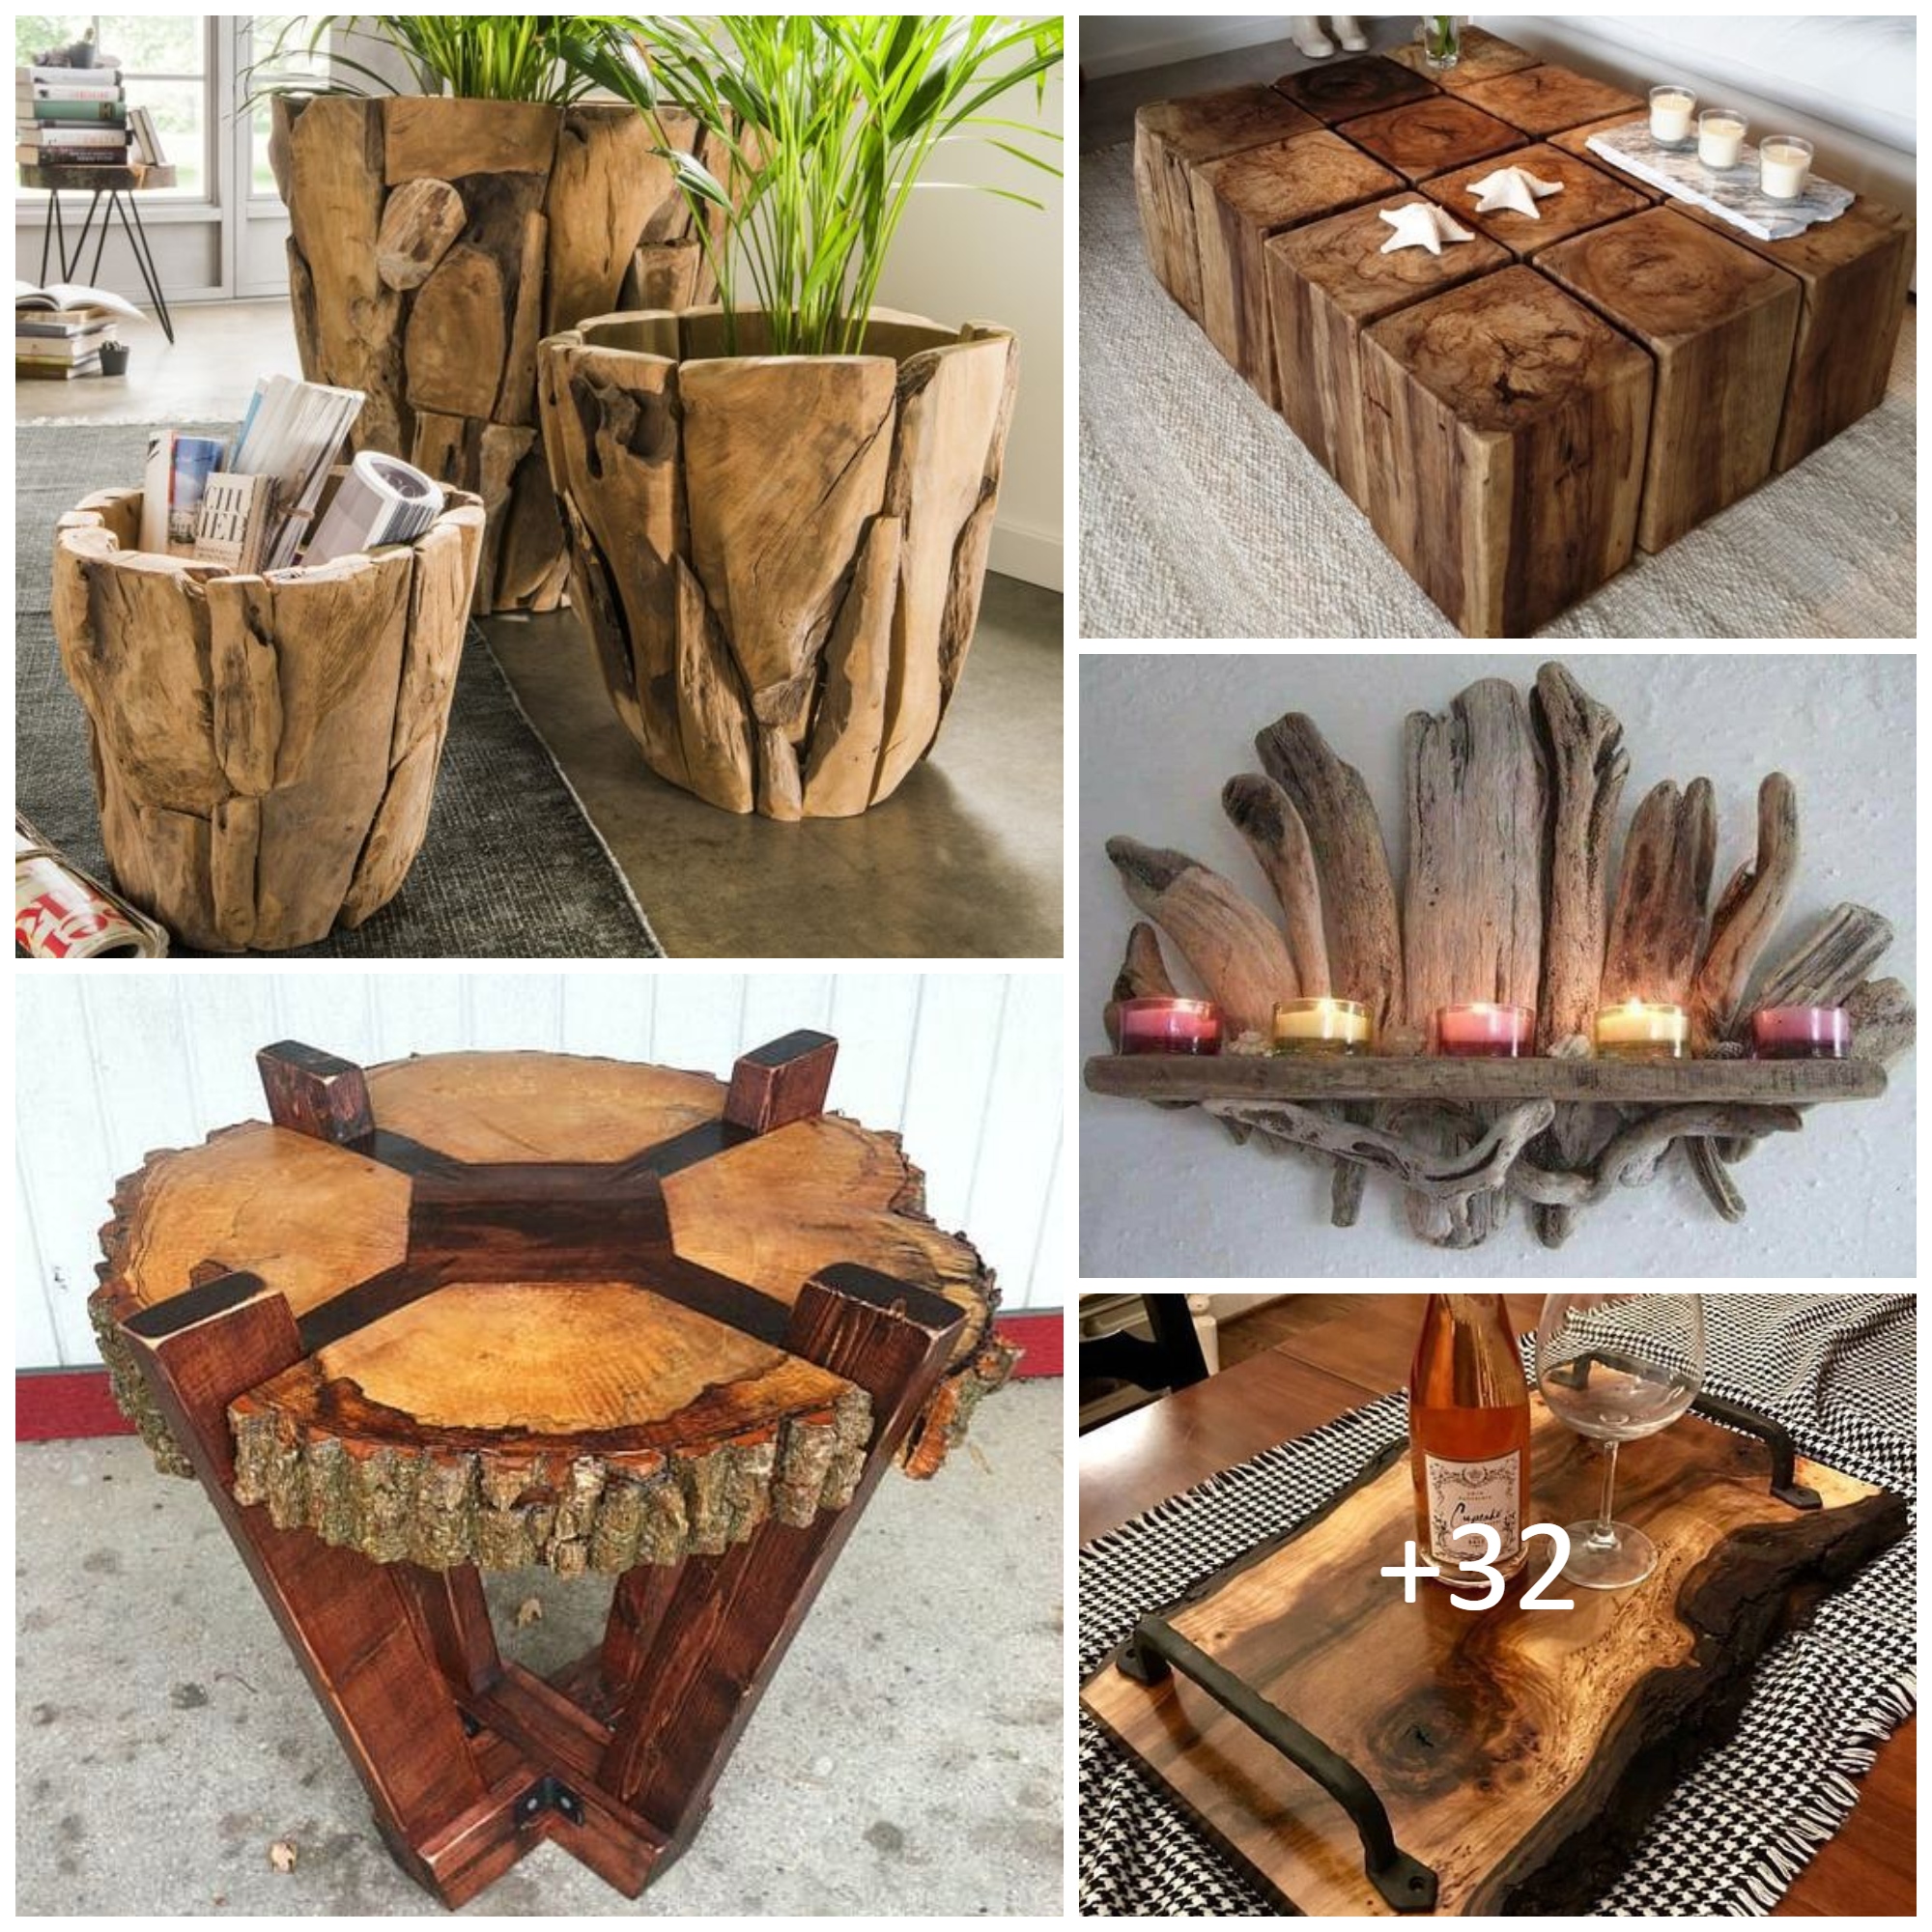 Woodworking useful ideas & inspirations for you